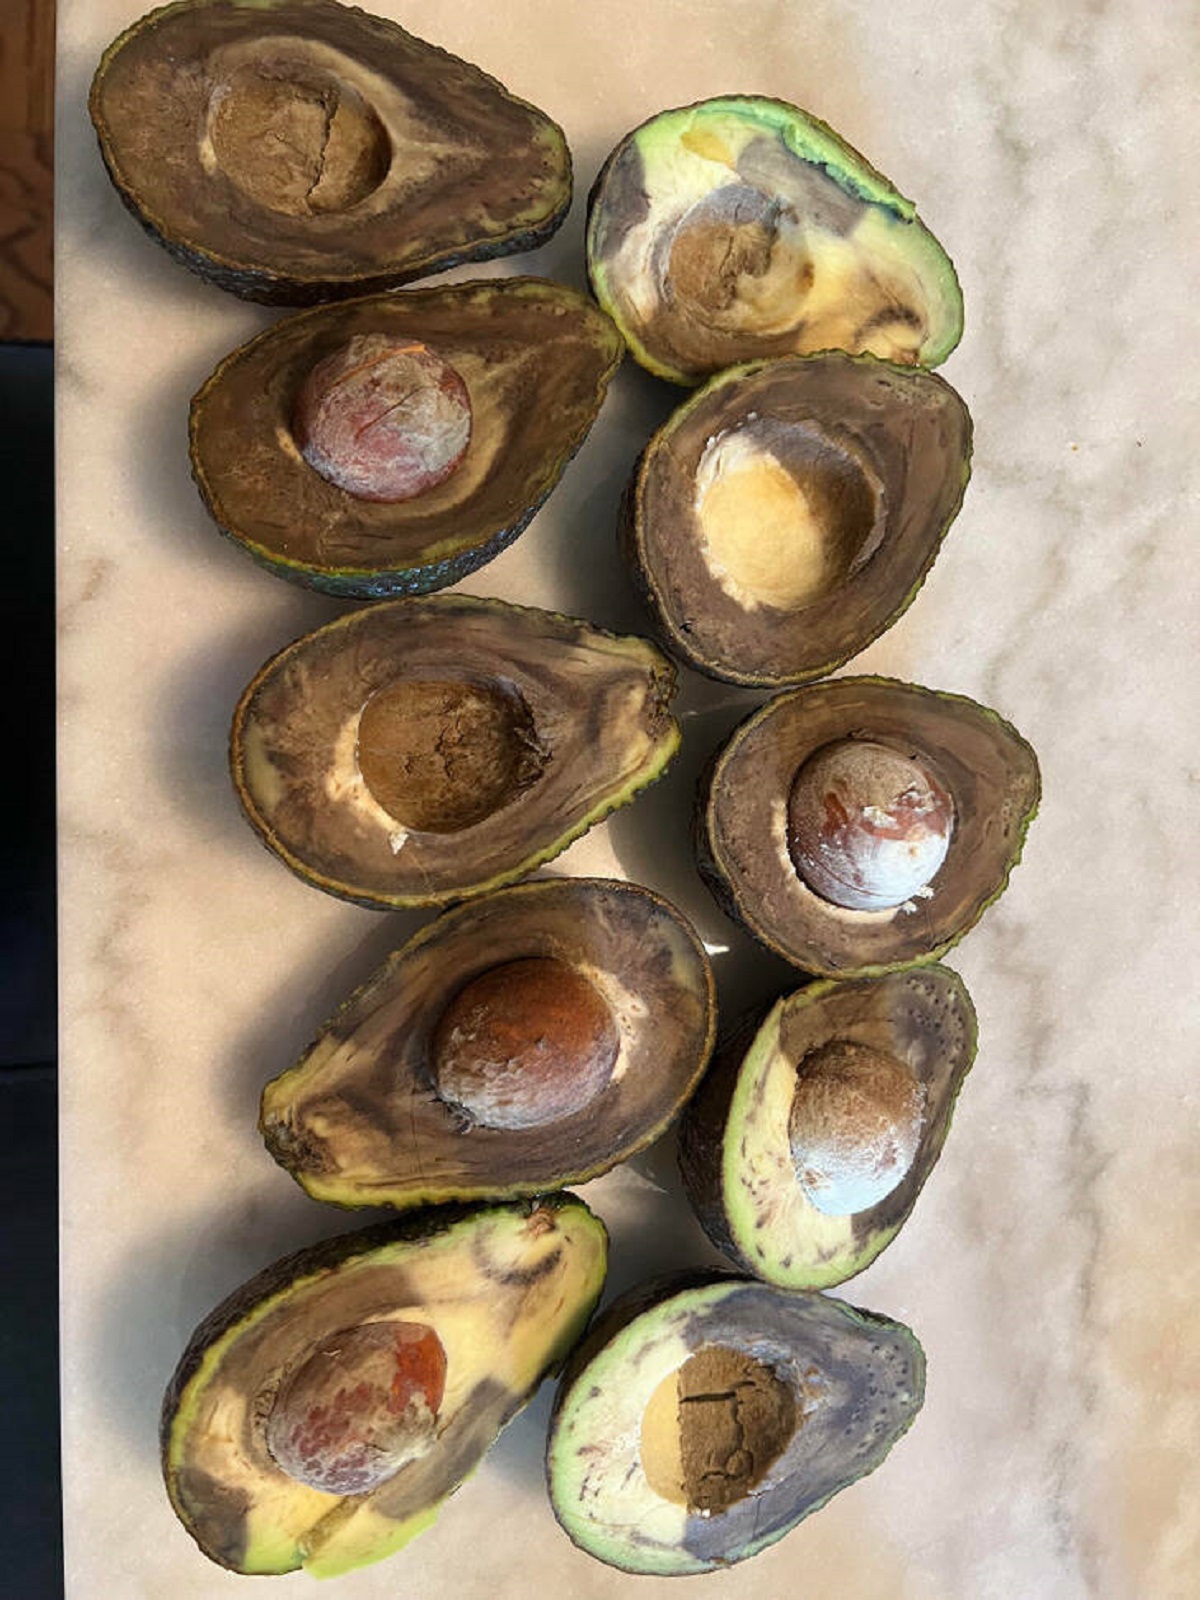 “Every single avocado (except 1) from the market pack I bought 2 days ago”